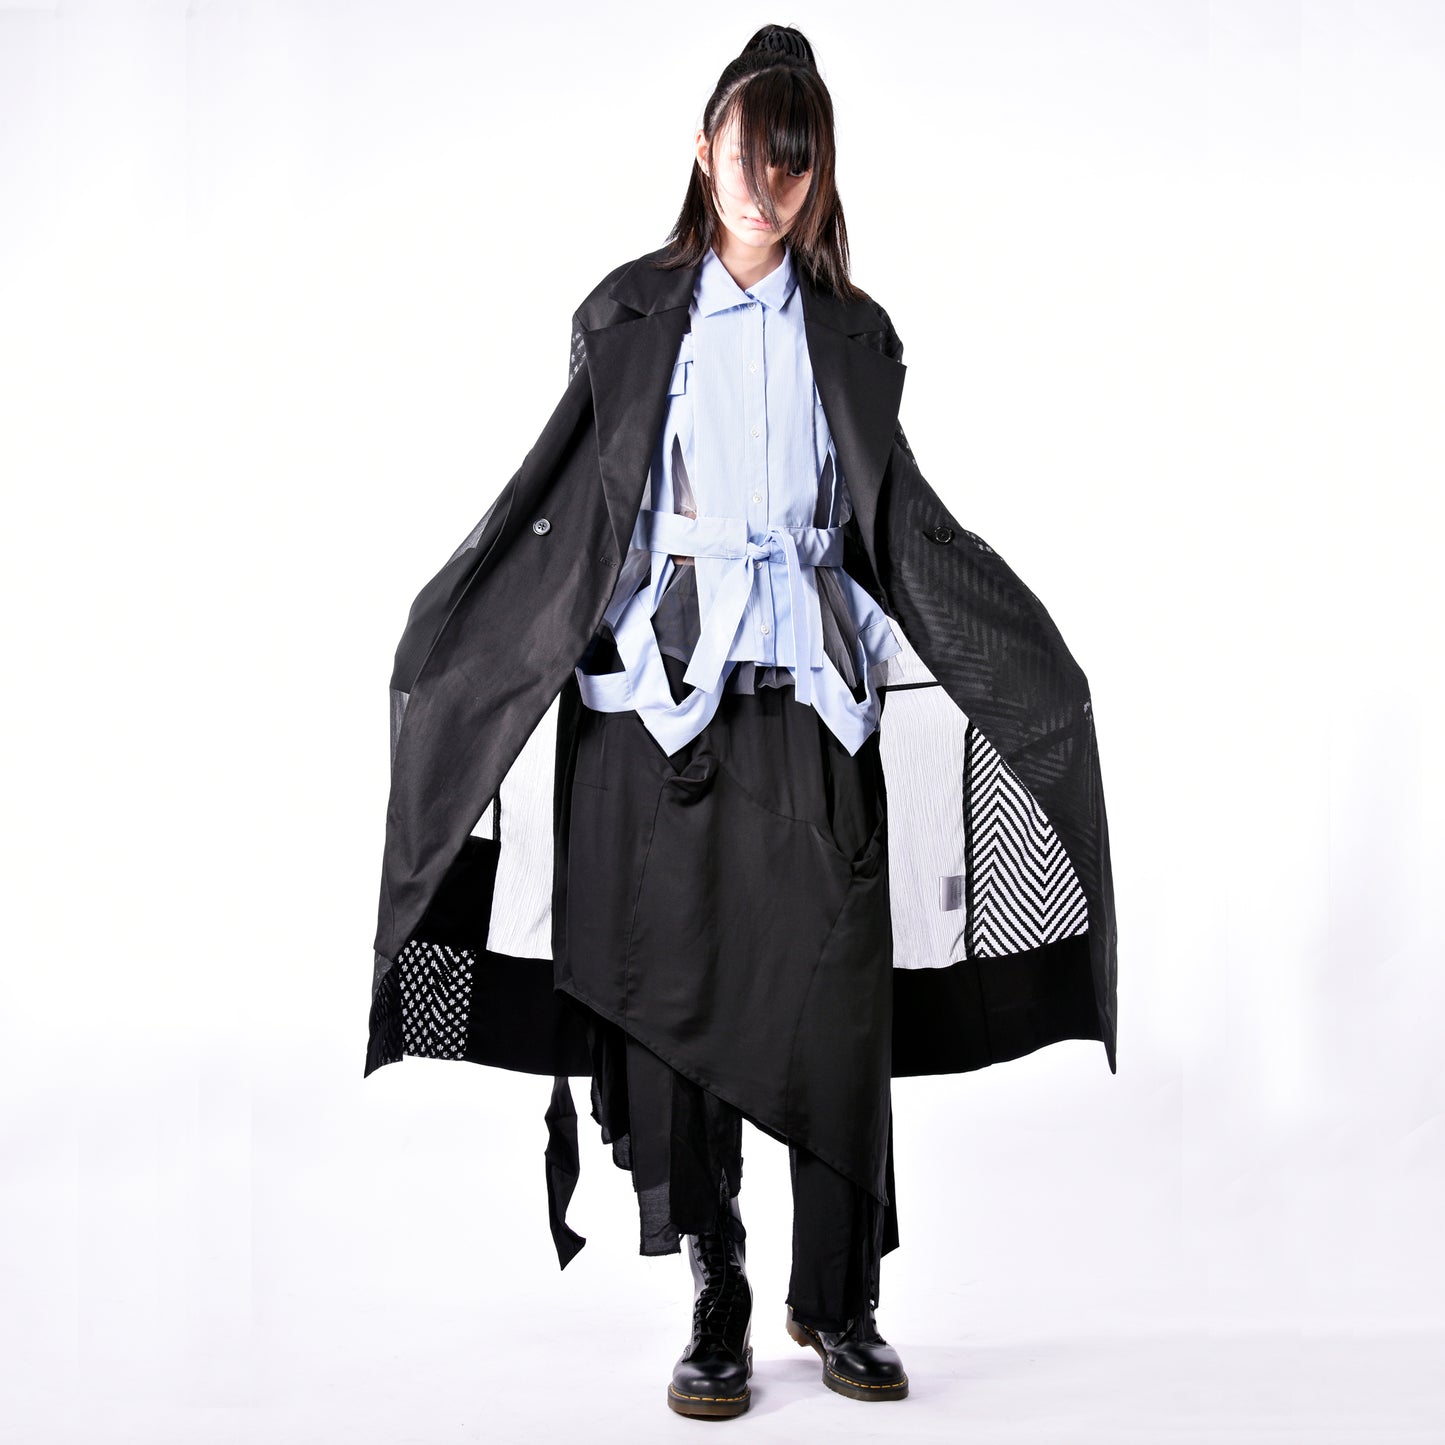 Coat - See-through Trench